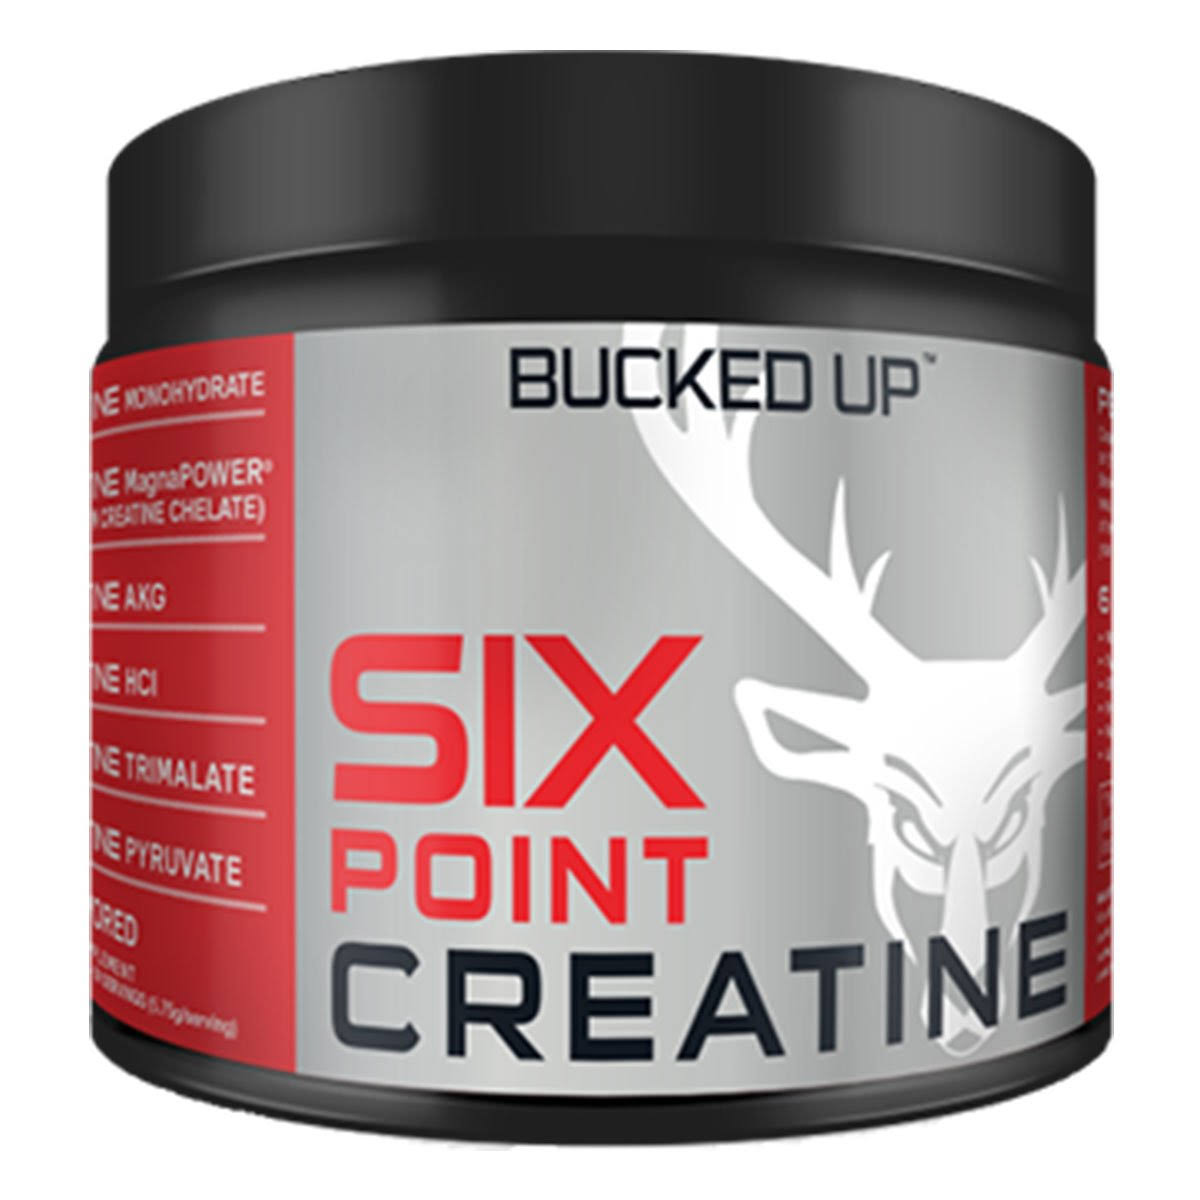 Bucked Up Six Point Creatine Six Types of Creatine - For Men and Women